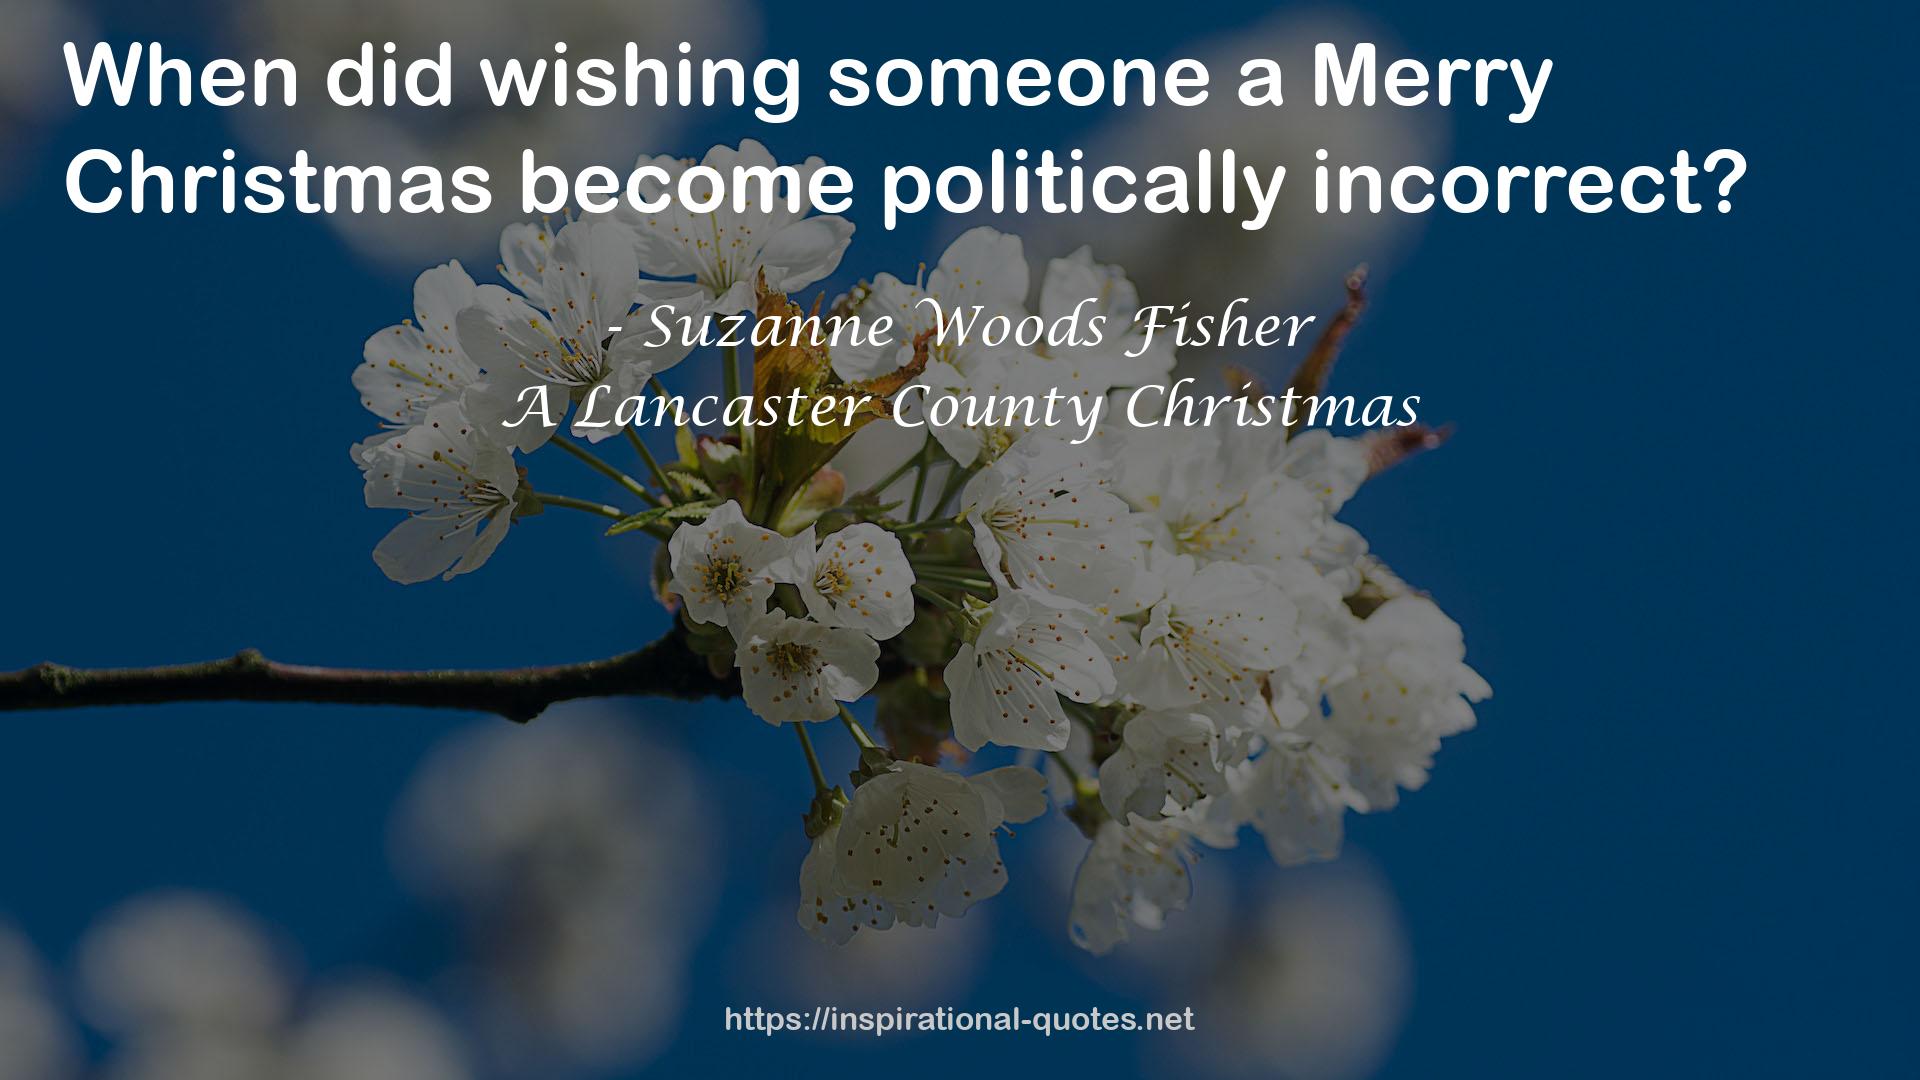 A Lancaster County Christmas QUOTES